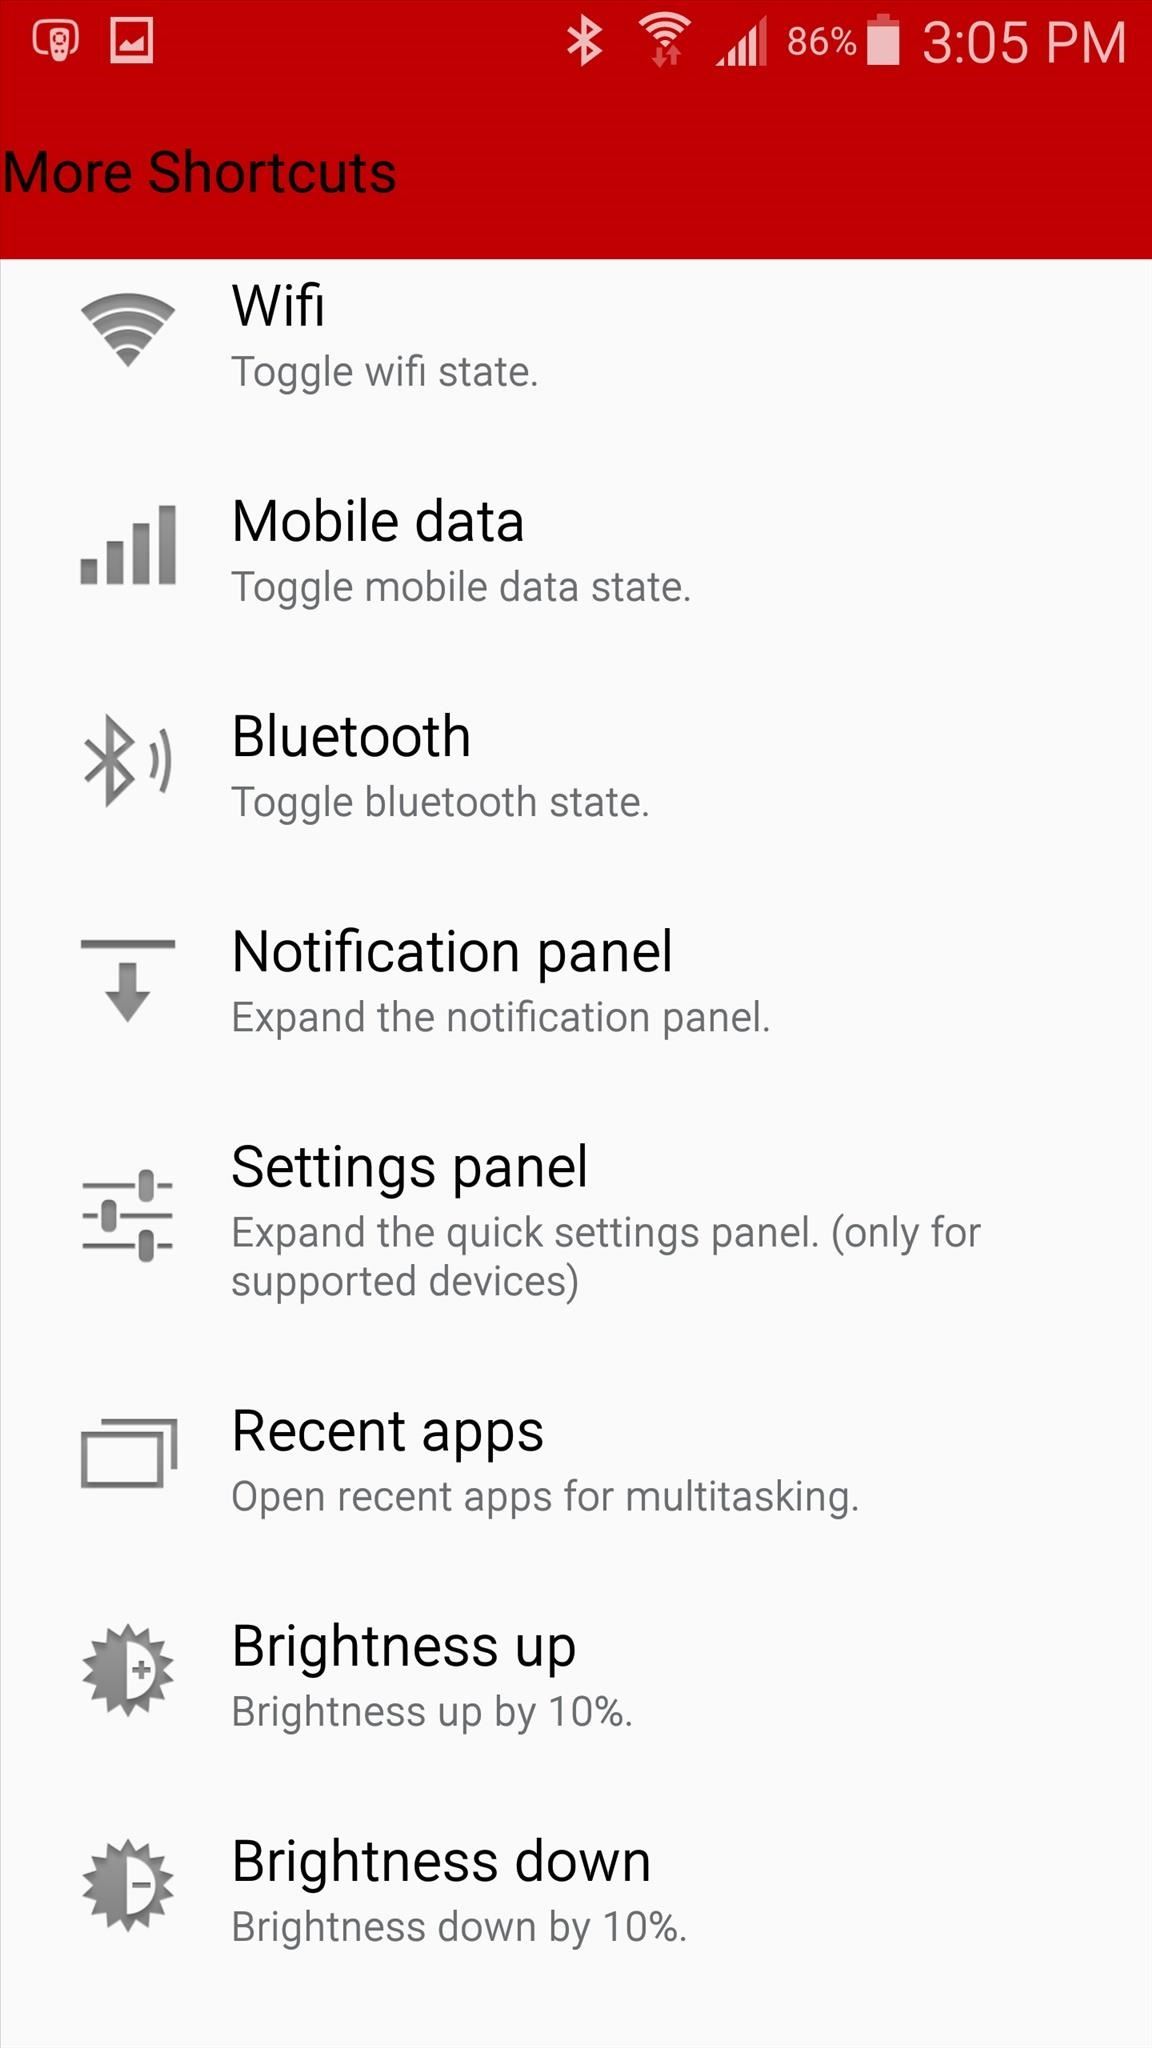 How to Add More Shortcuts to Your Android's Home Screen